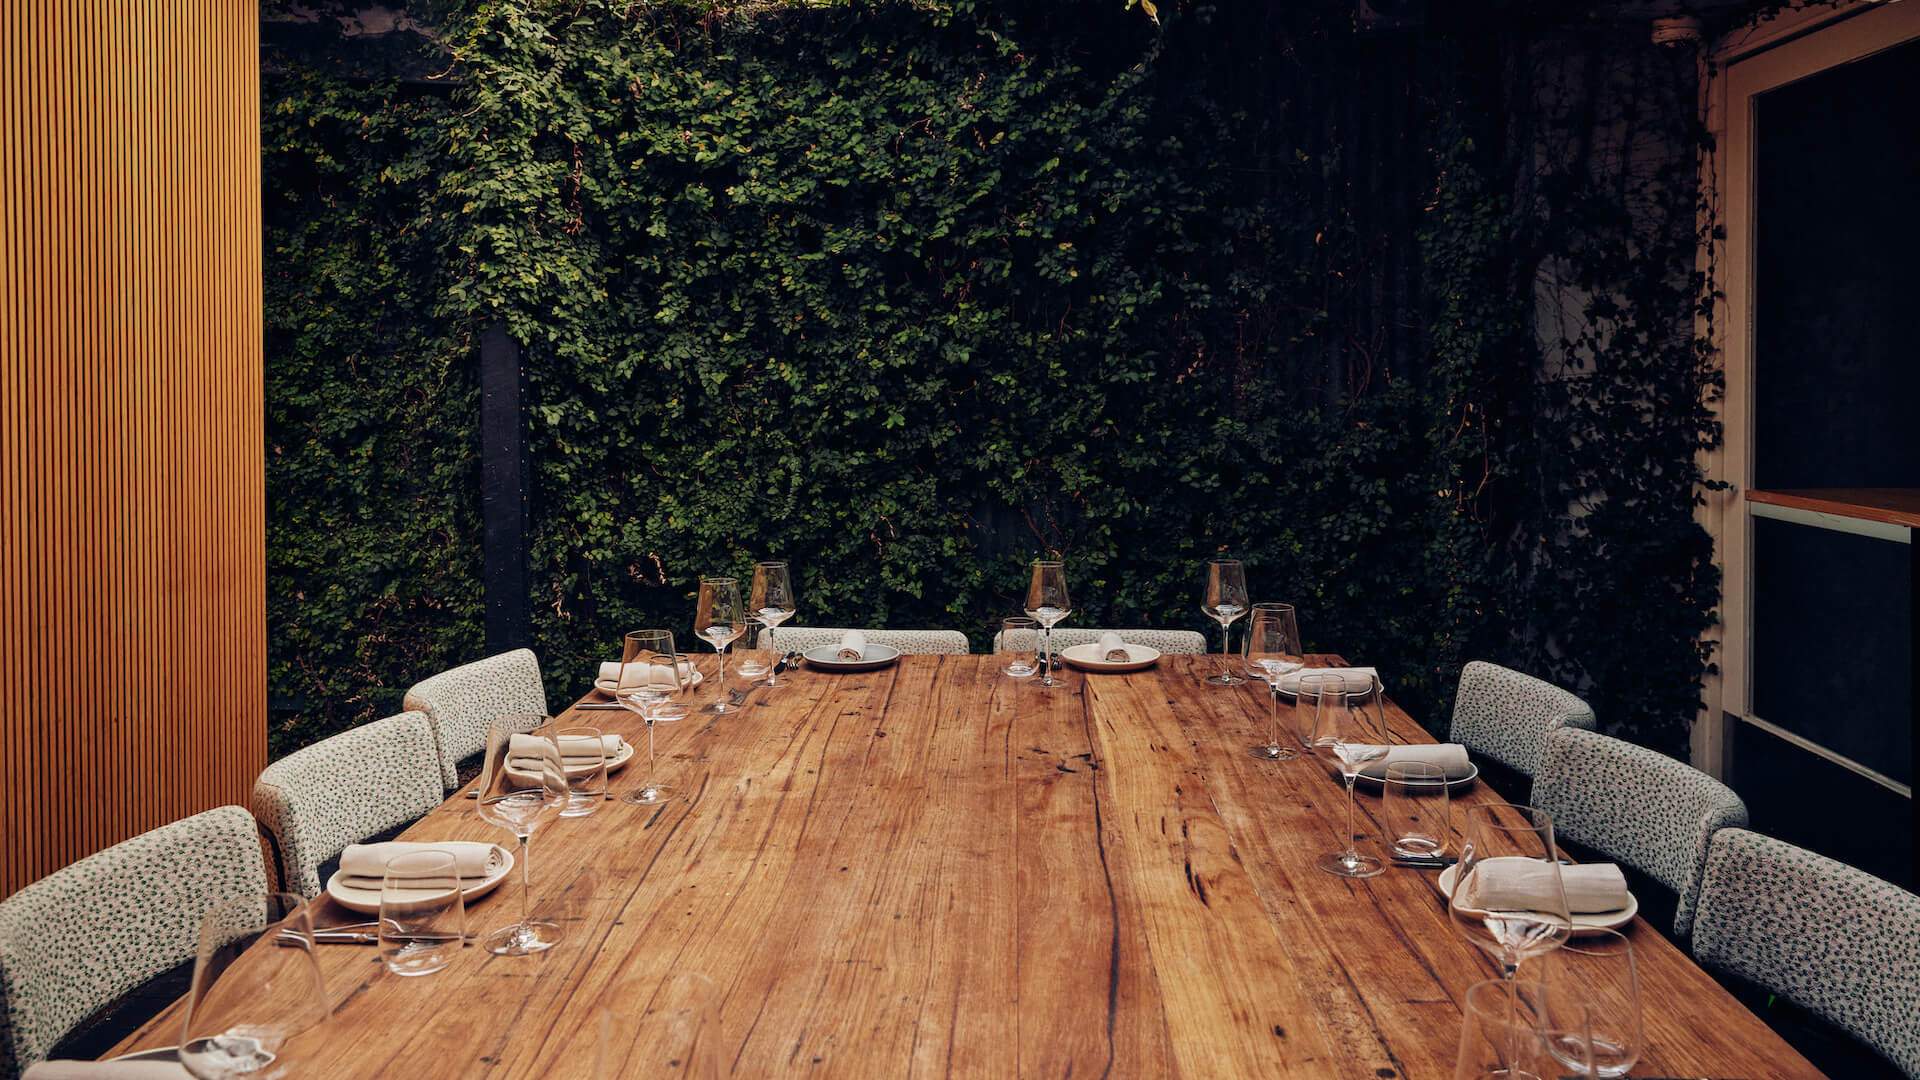 Etta's Greenhouse Room - one of the best private dining rooms in Melbourne.